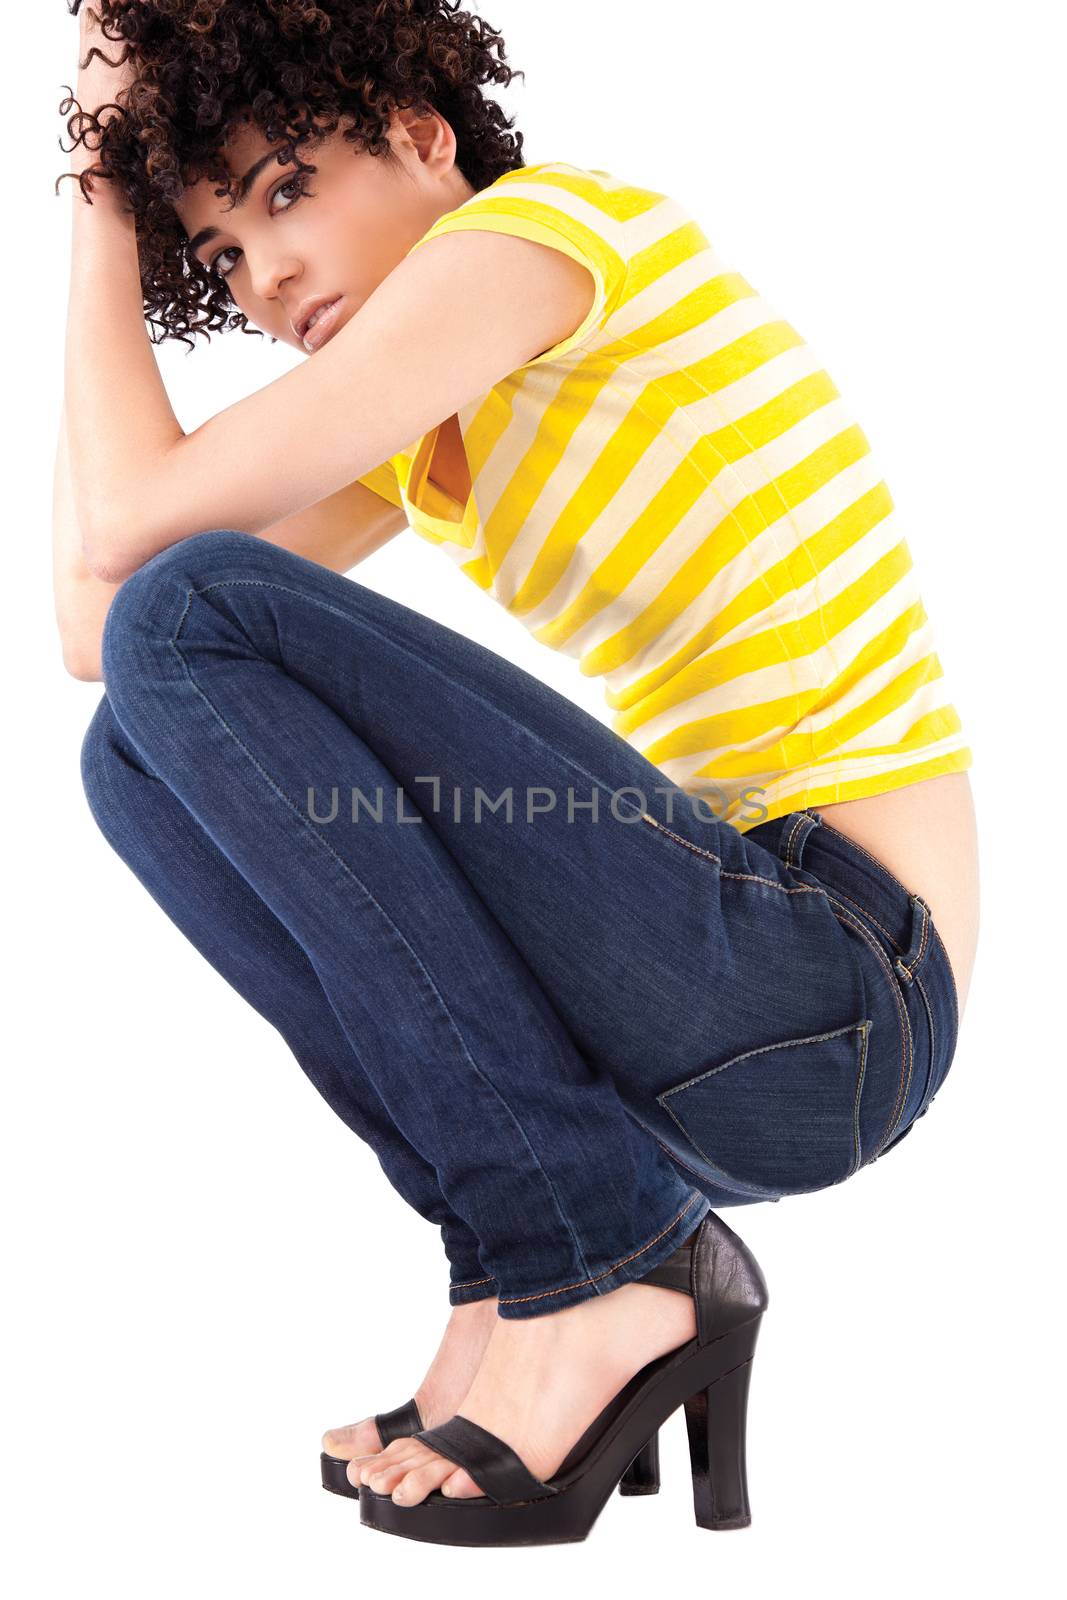 Young woman squatting with curly hair and shirt with yellow stripes.